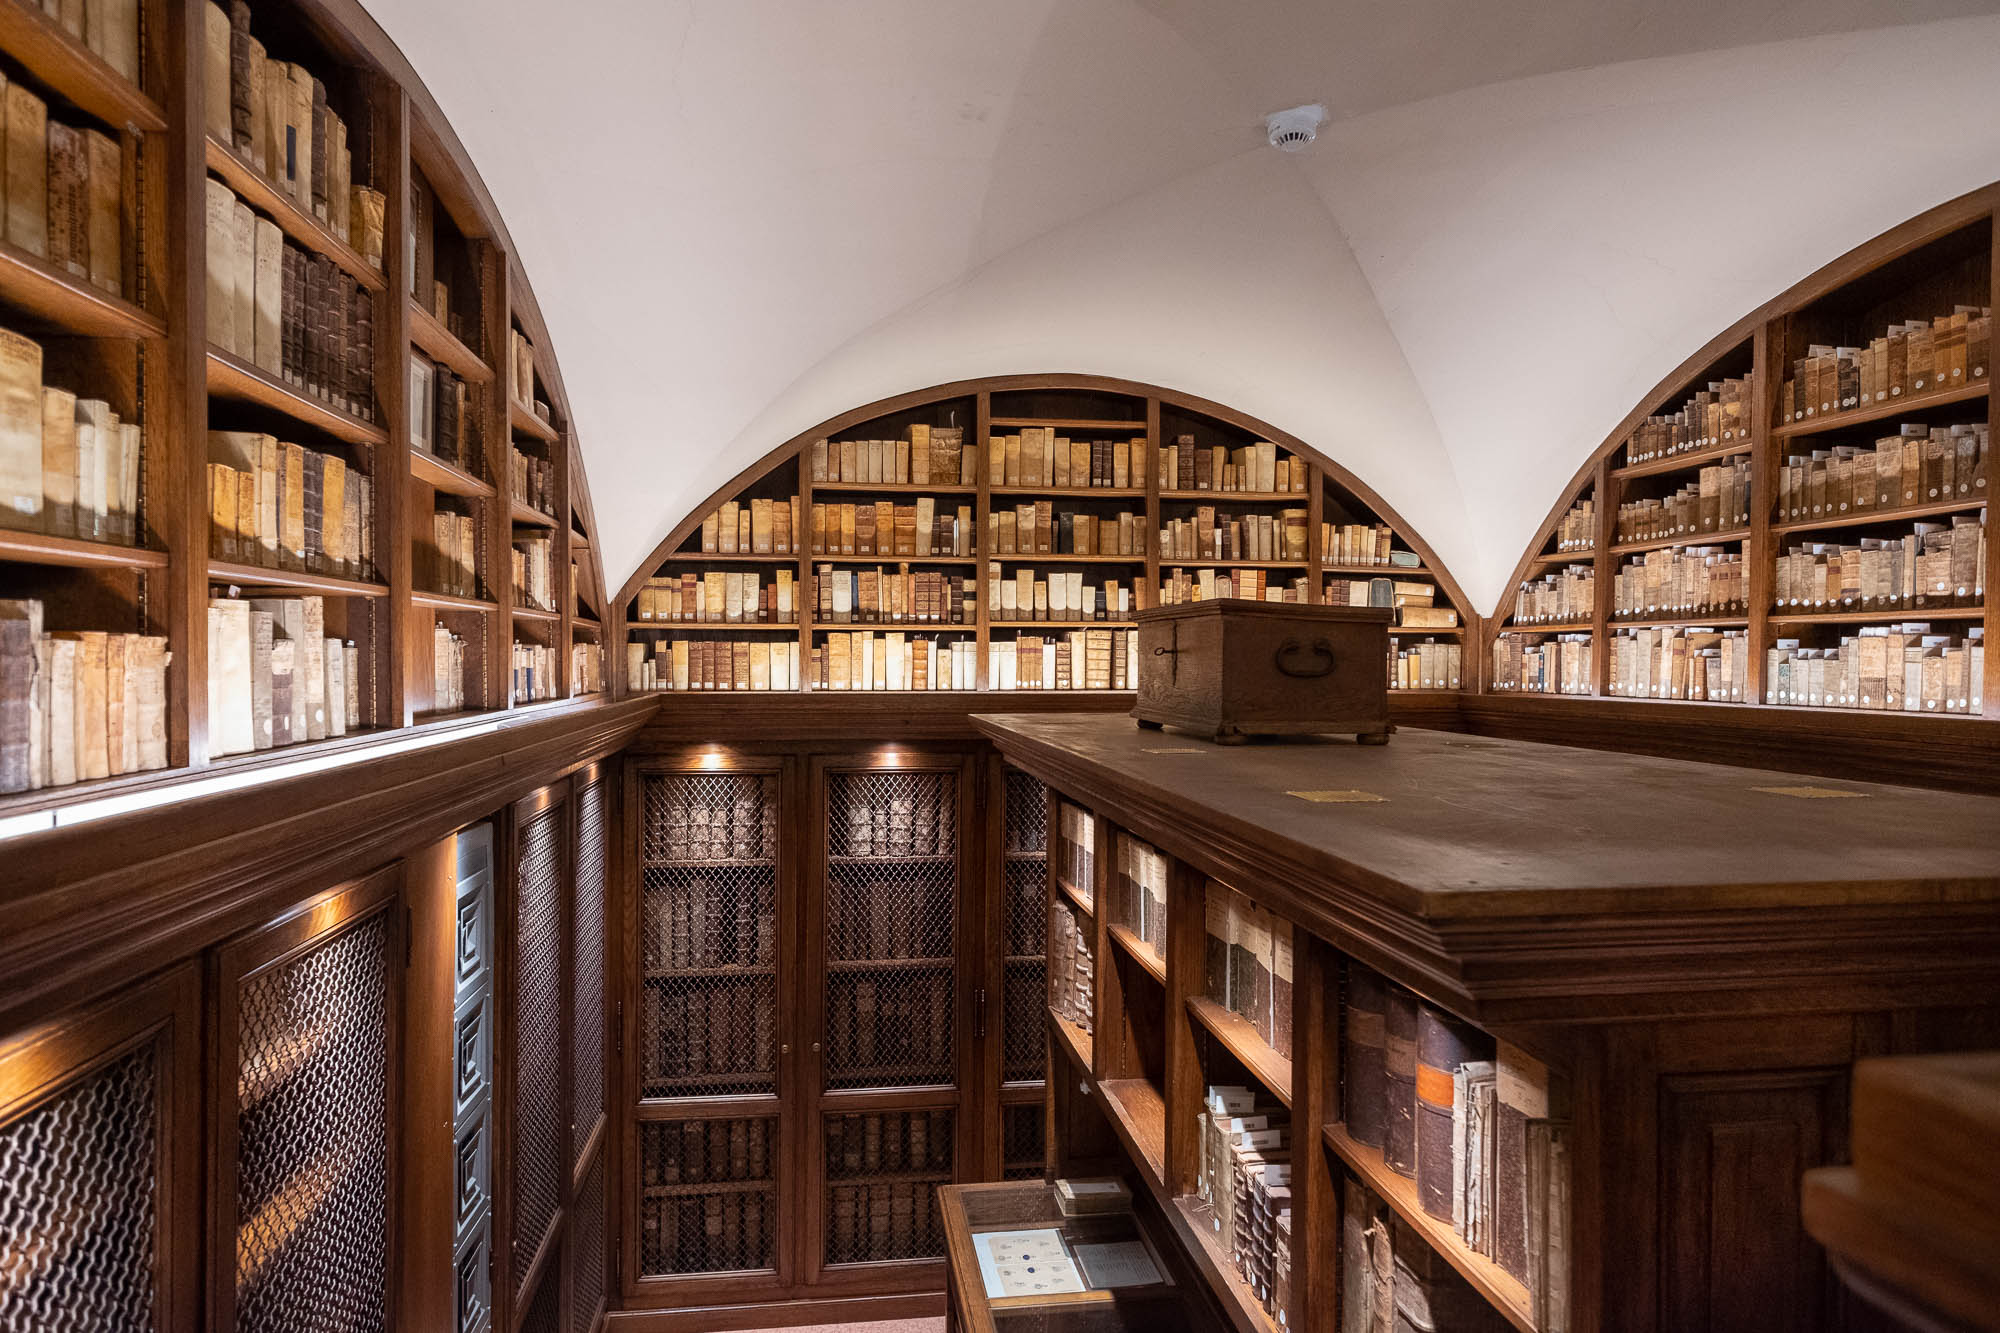 Interior of a rare book library with dark wood shelves filled with precious volumes behind protective netting. The shelves are rounded at the top to fit with the vaulted space.